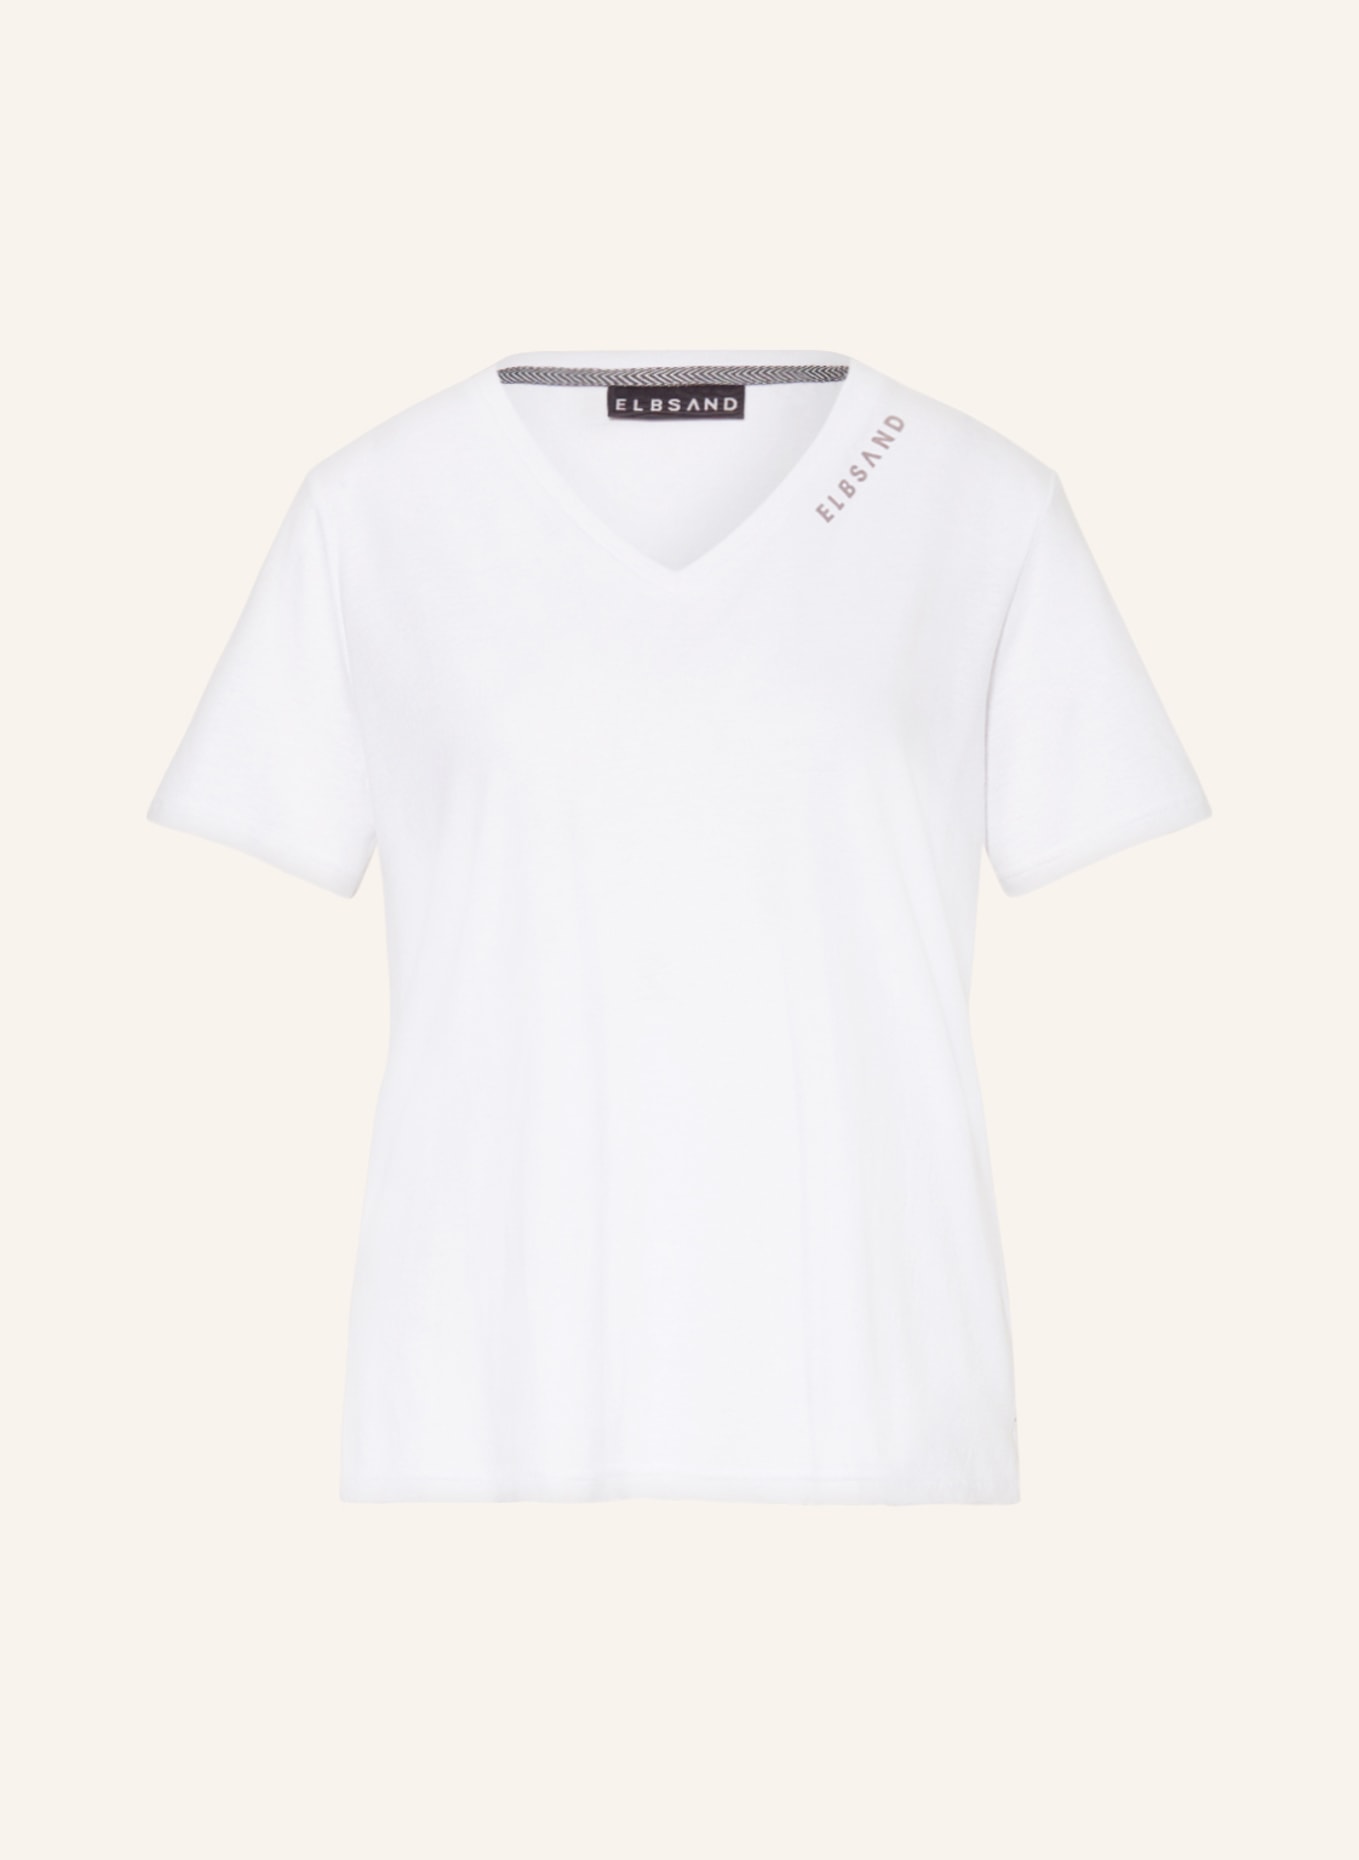 ELBSAND T-shirt TALYN, Color: WHITE (Image 1)